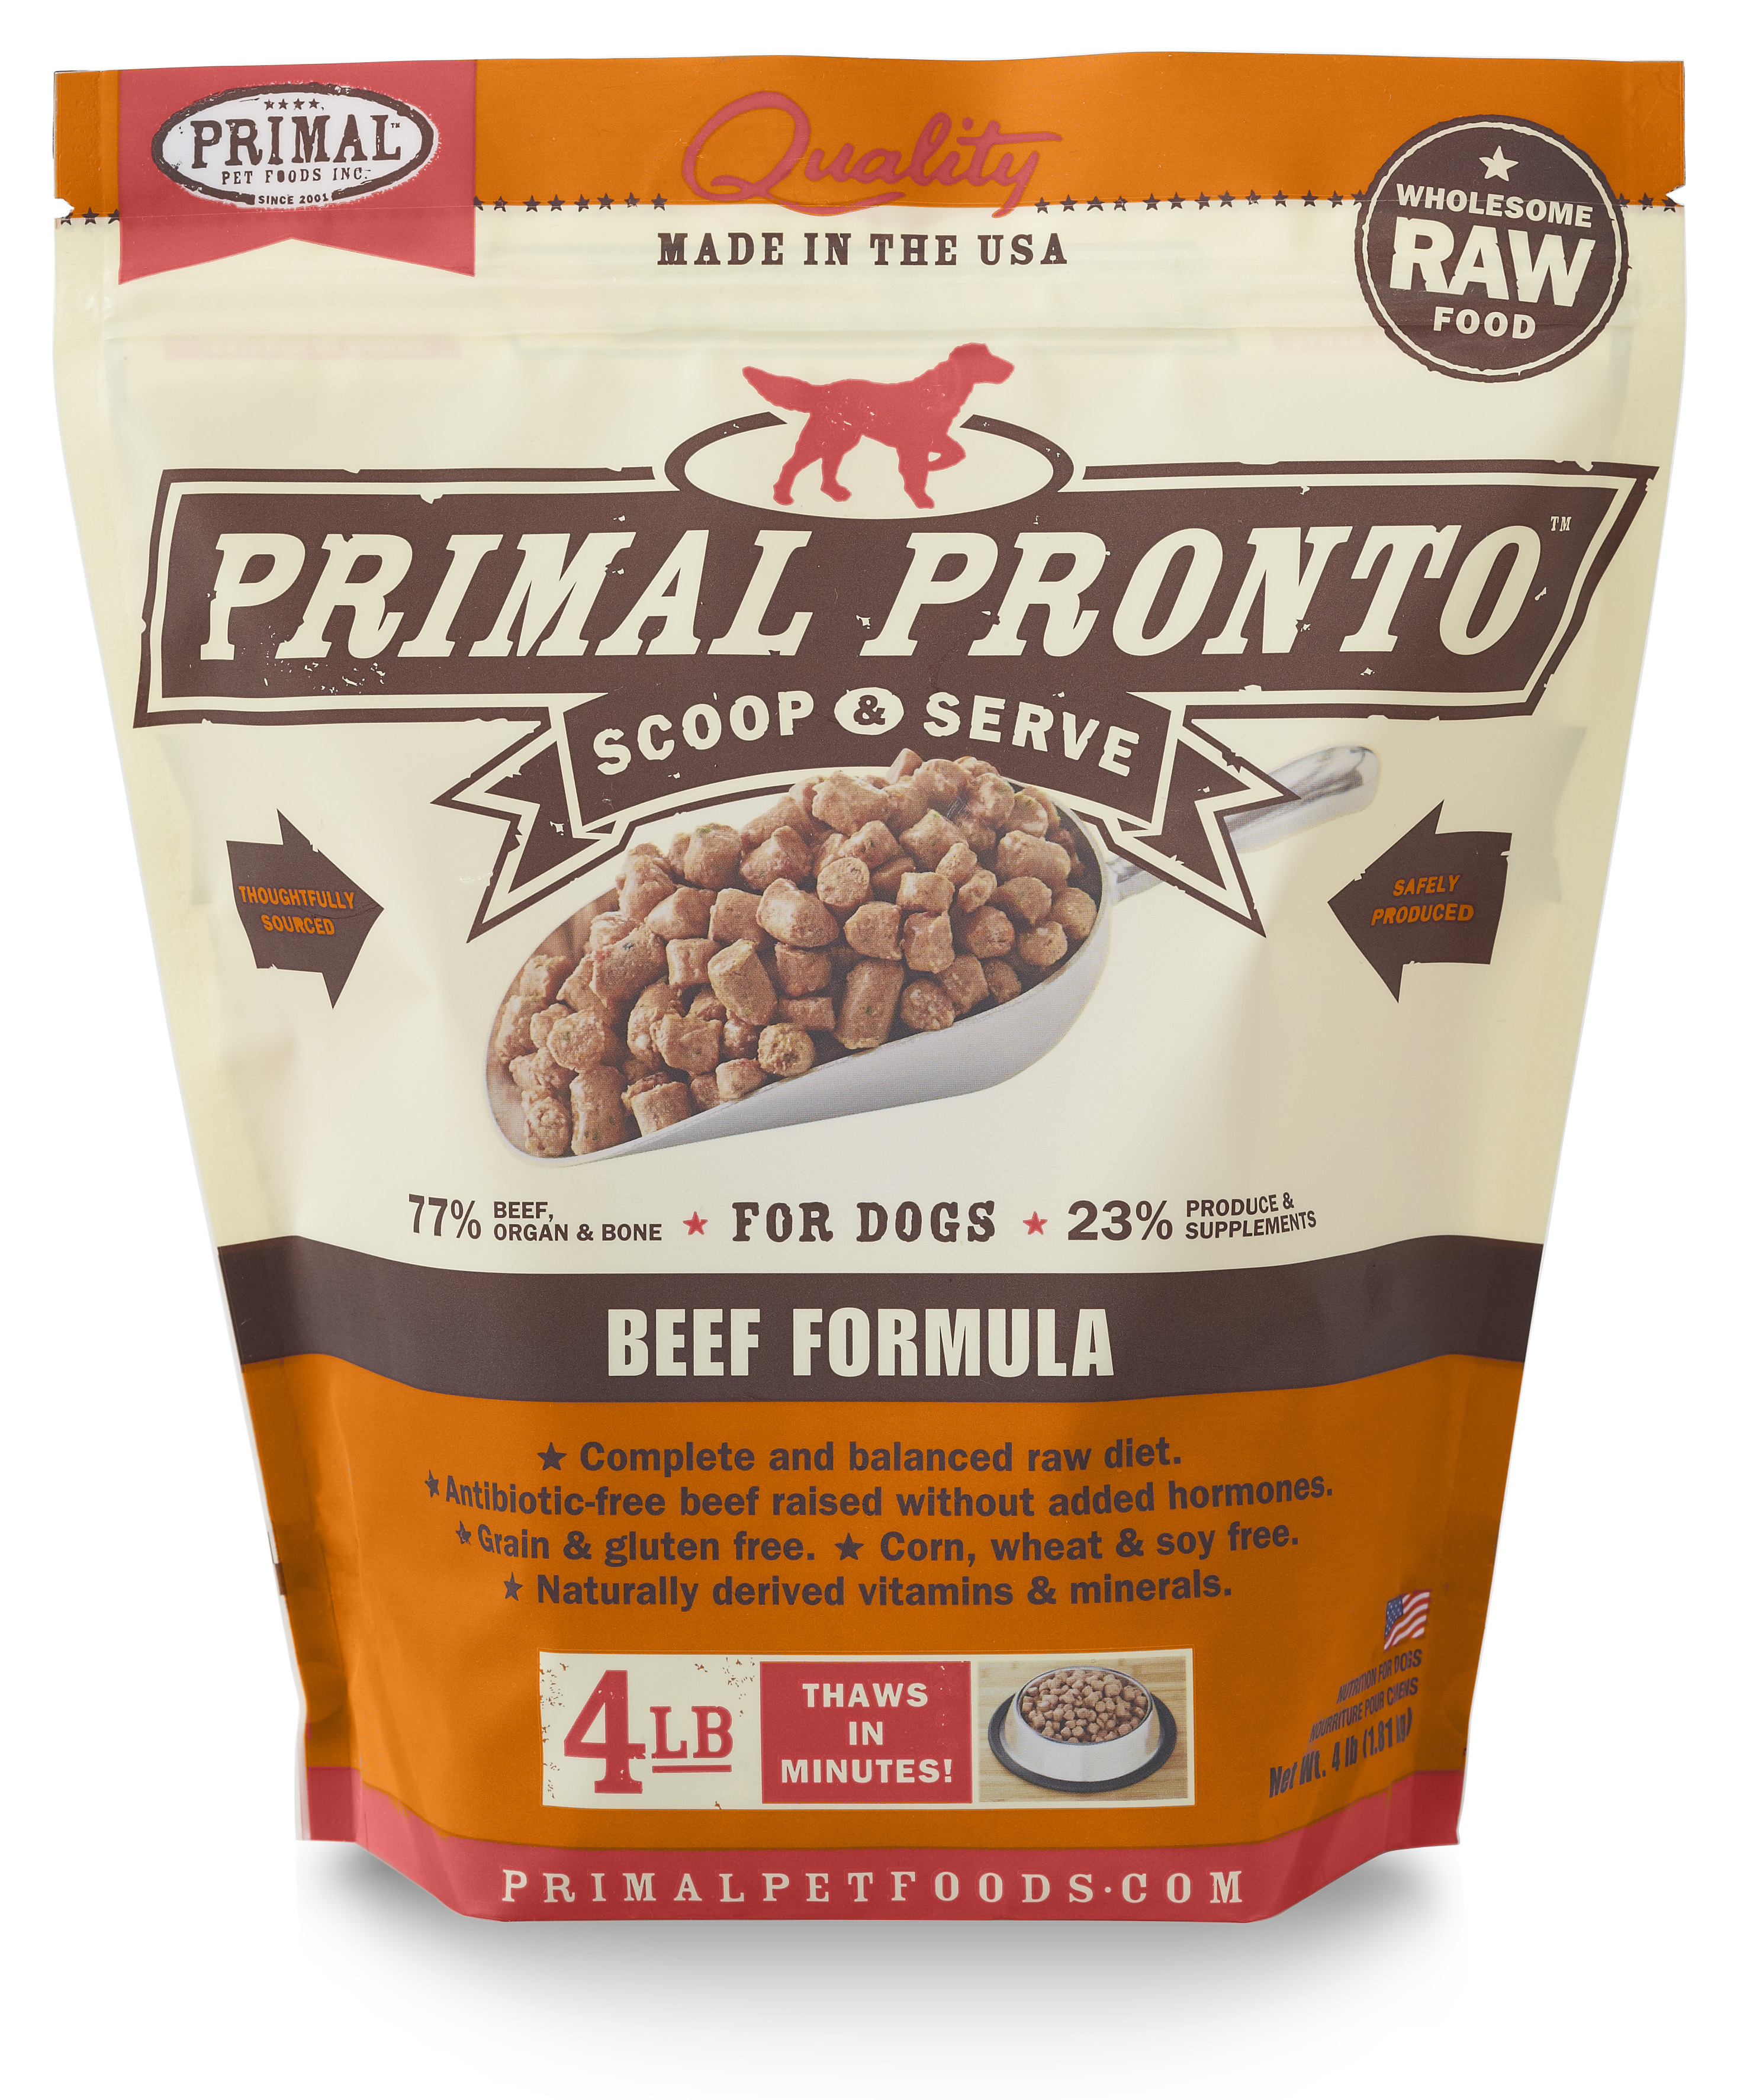 Primal Pronto Raw Frozen Canine Beef Formula, 4 lbs